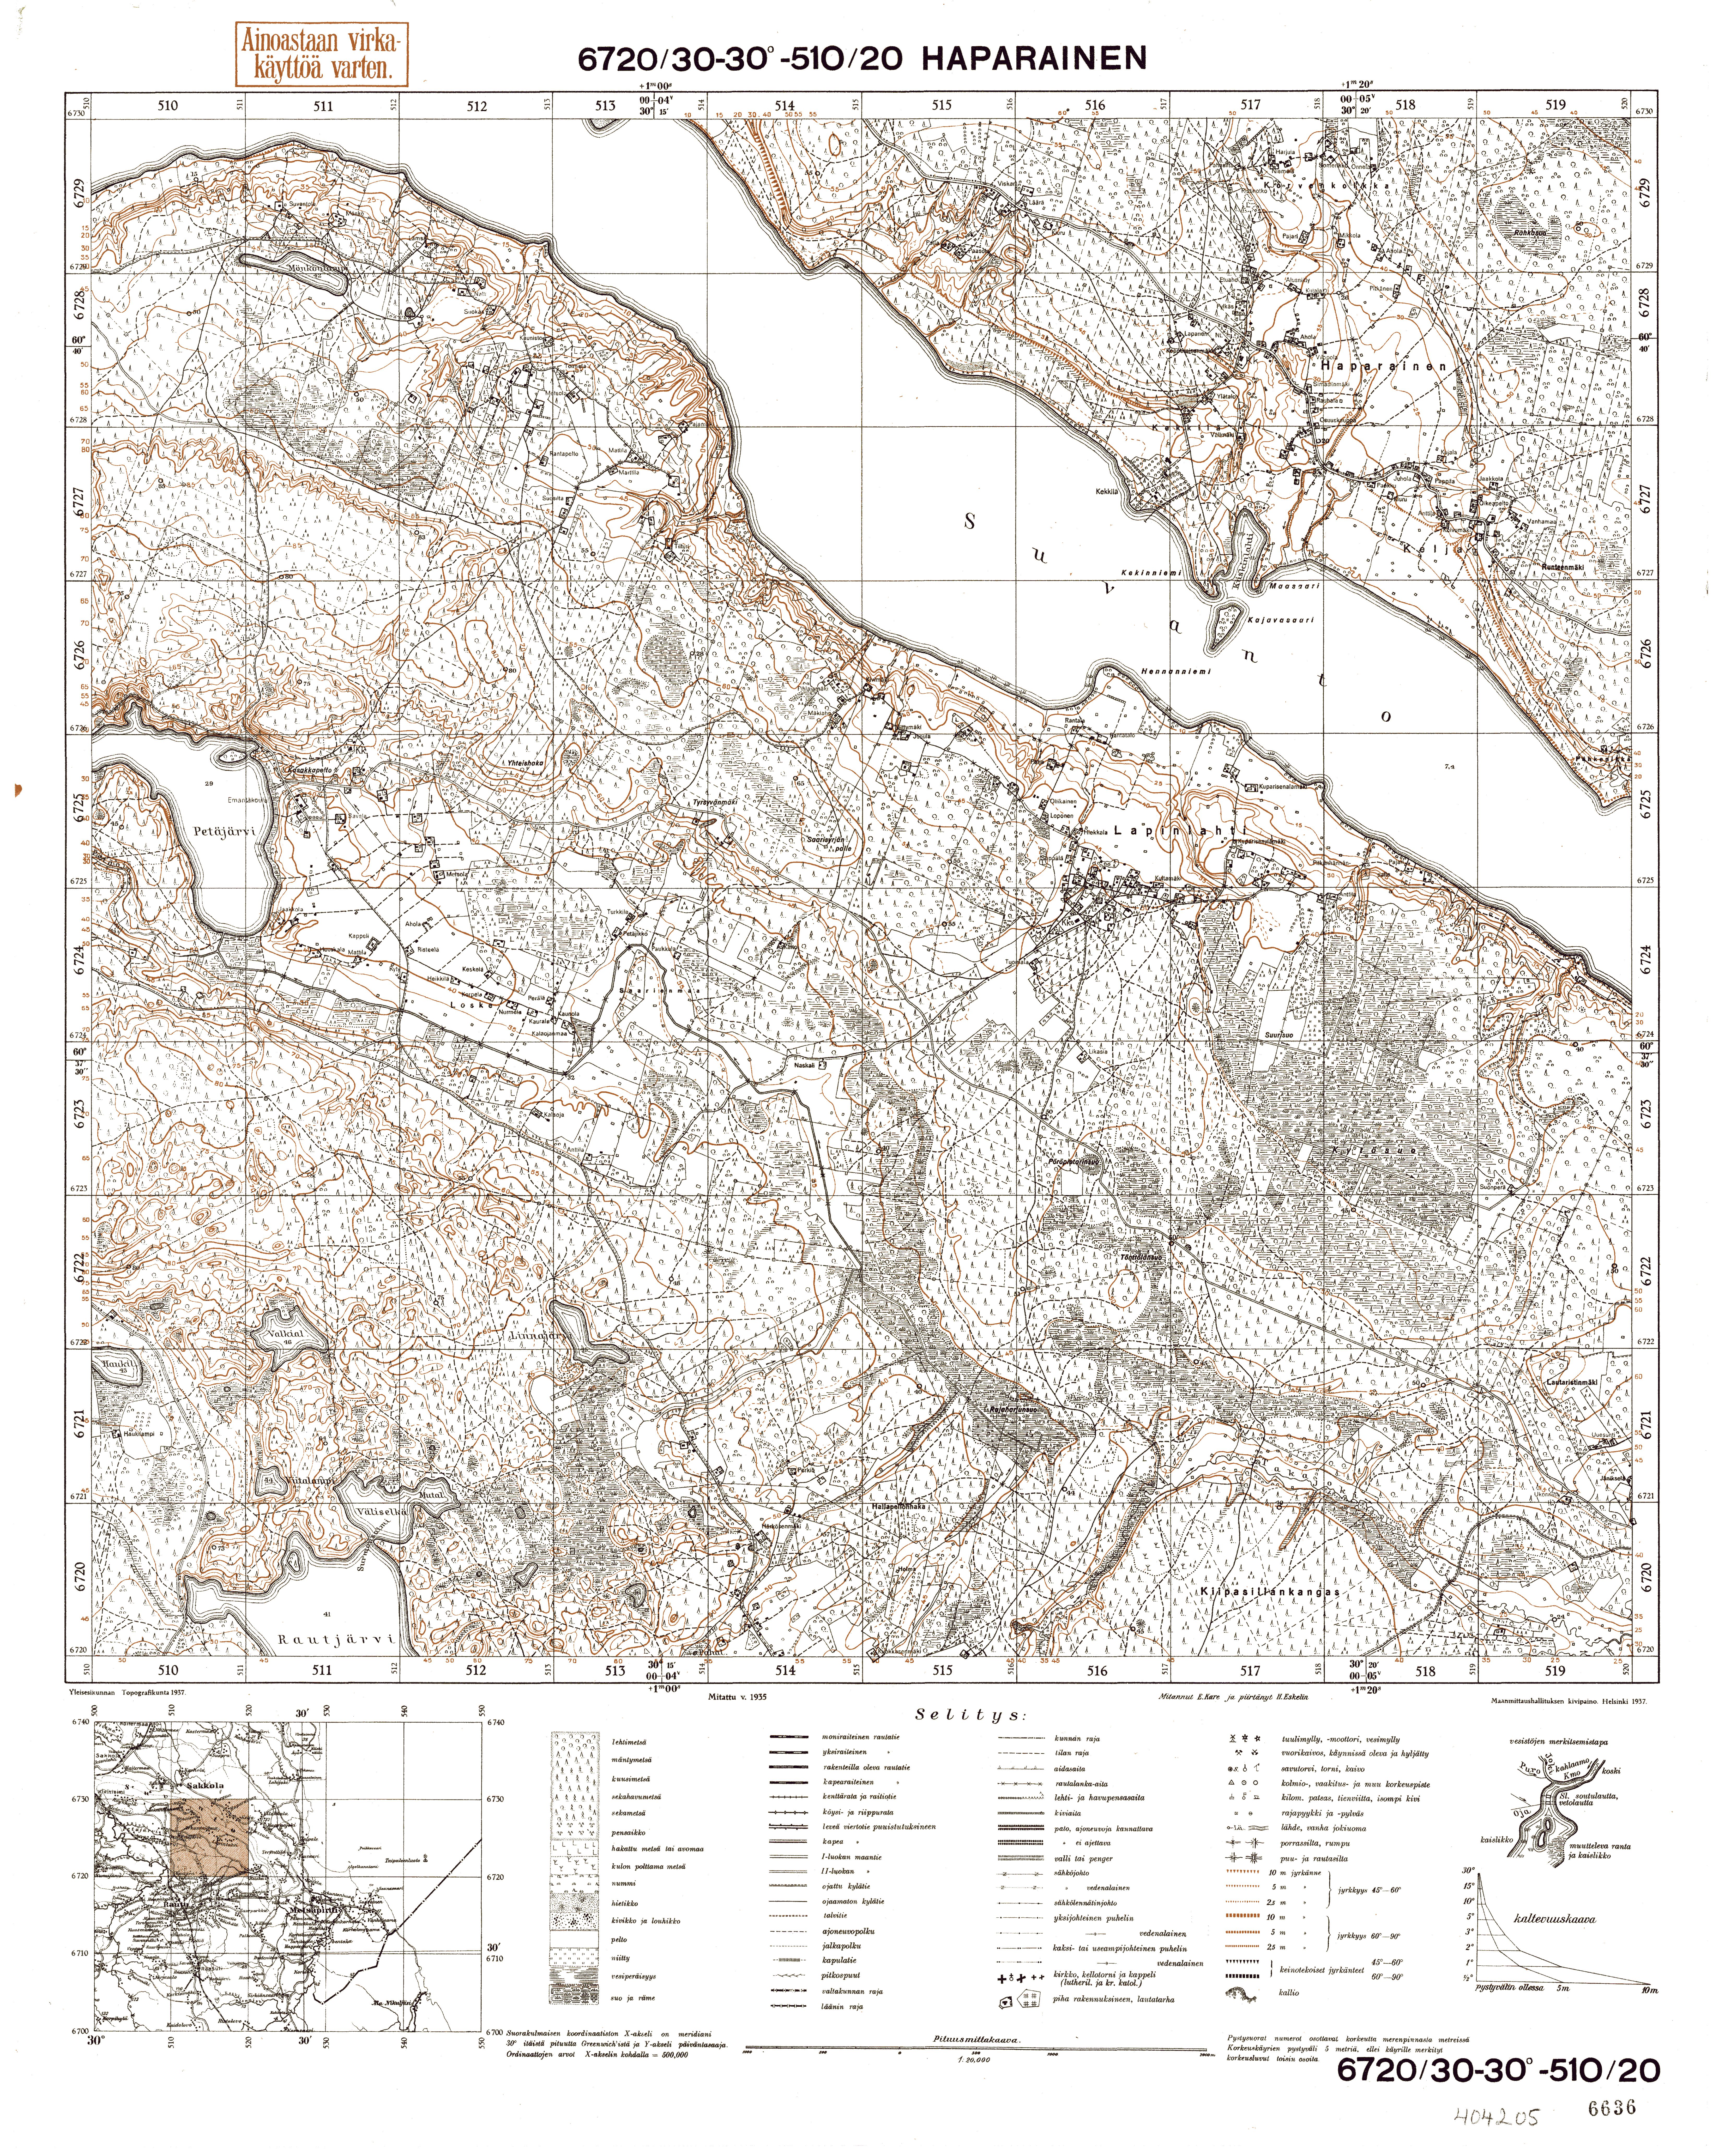 Portovoje. Haparainen. Topografikartta 404205. Topographic map from 1936. Use the zooming tool to explore in higher level of detail. Obtain as a quality print or high resolution image